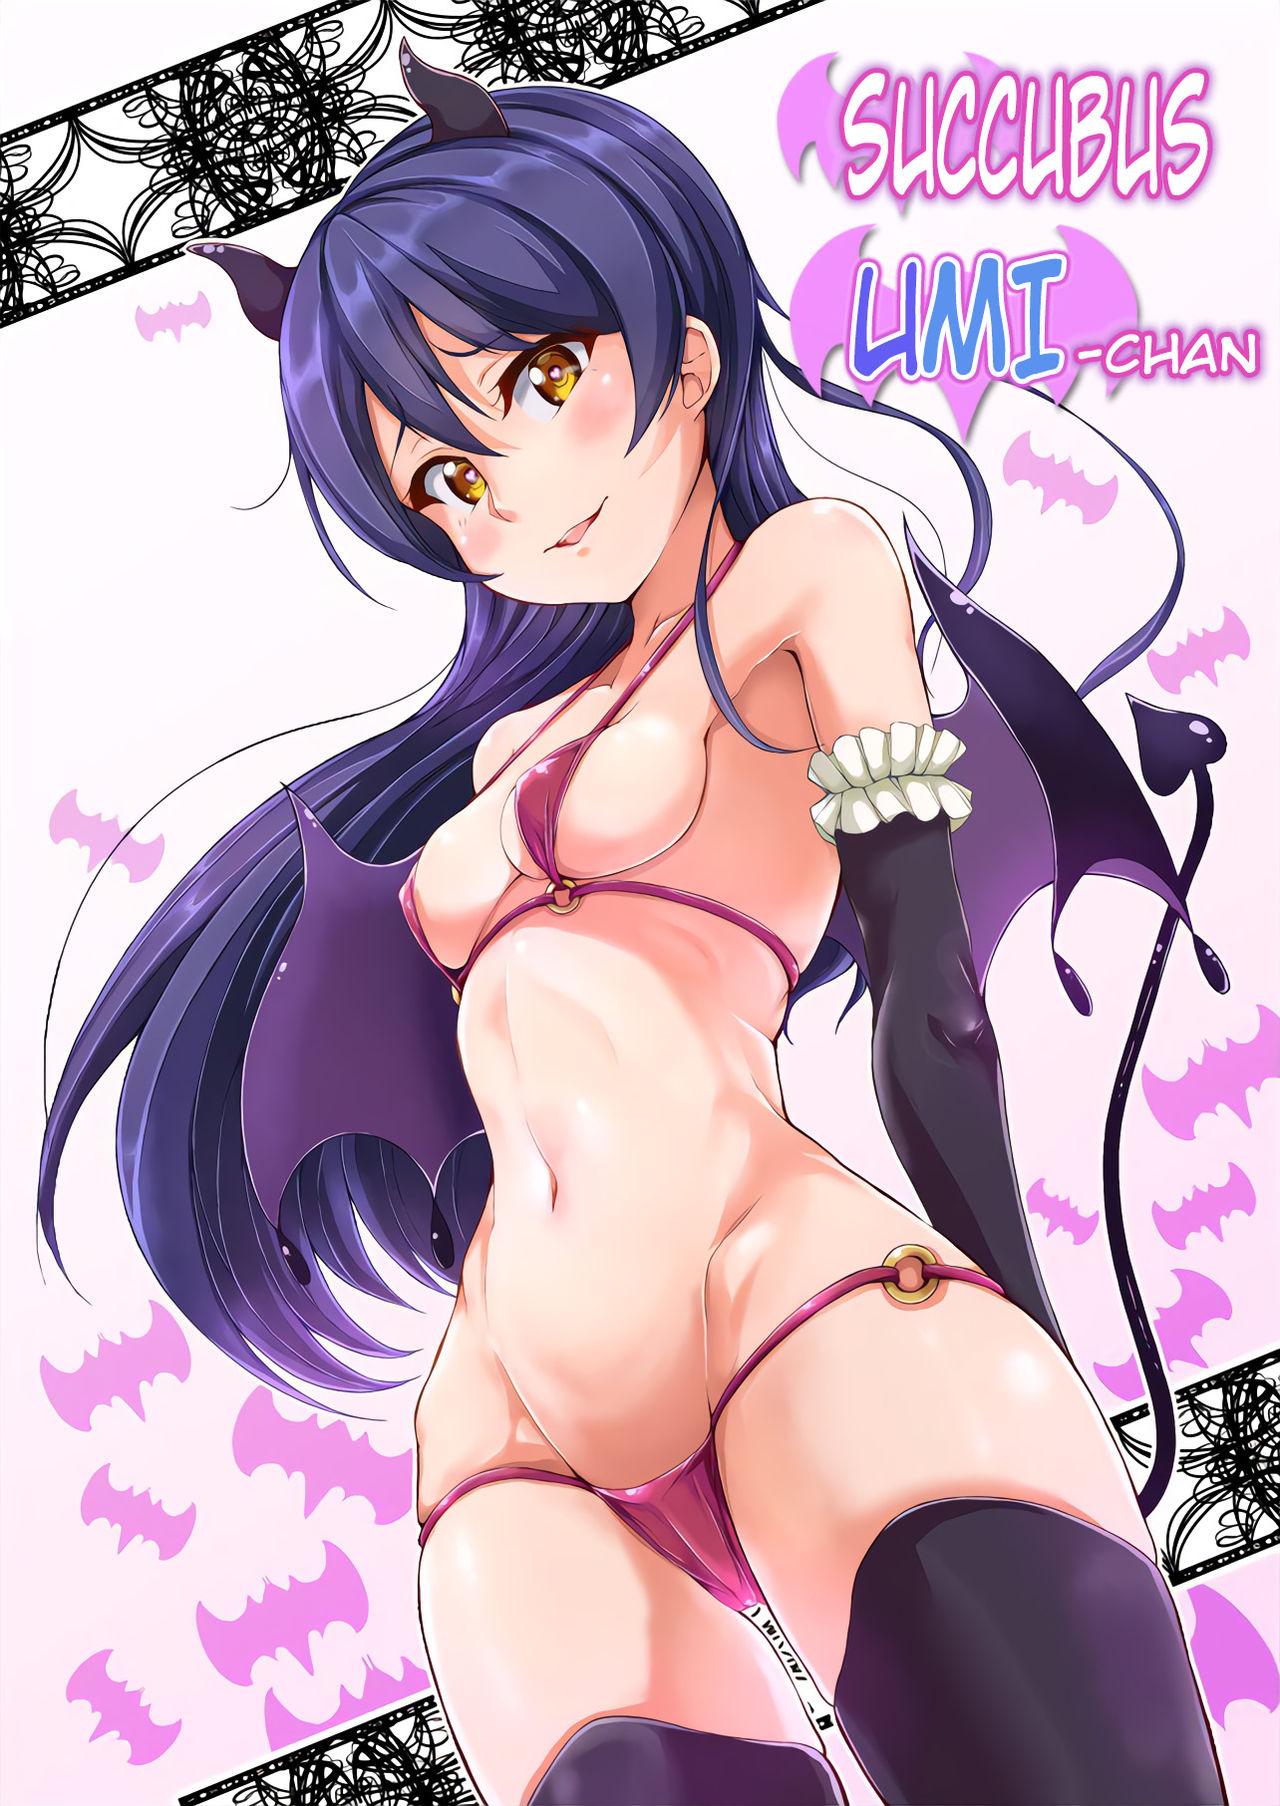 Stroking Succubus Umi-chan - Love live Stepbrother - Page 1